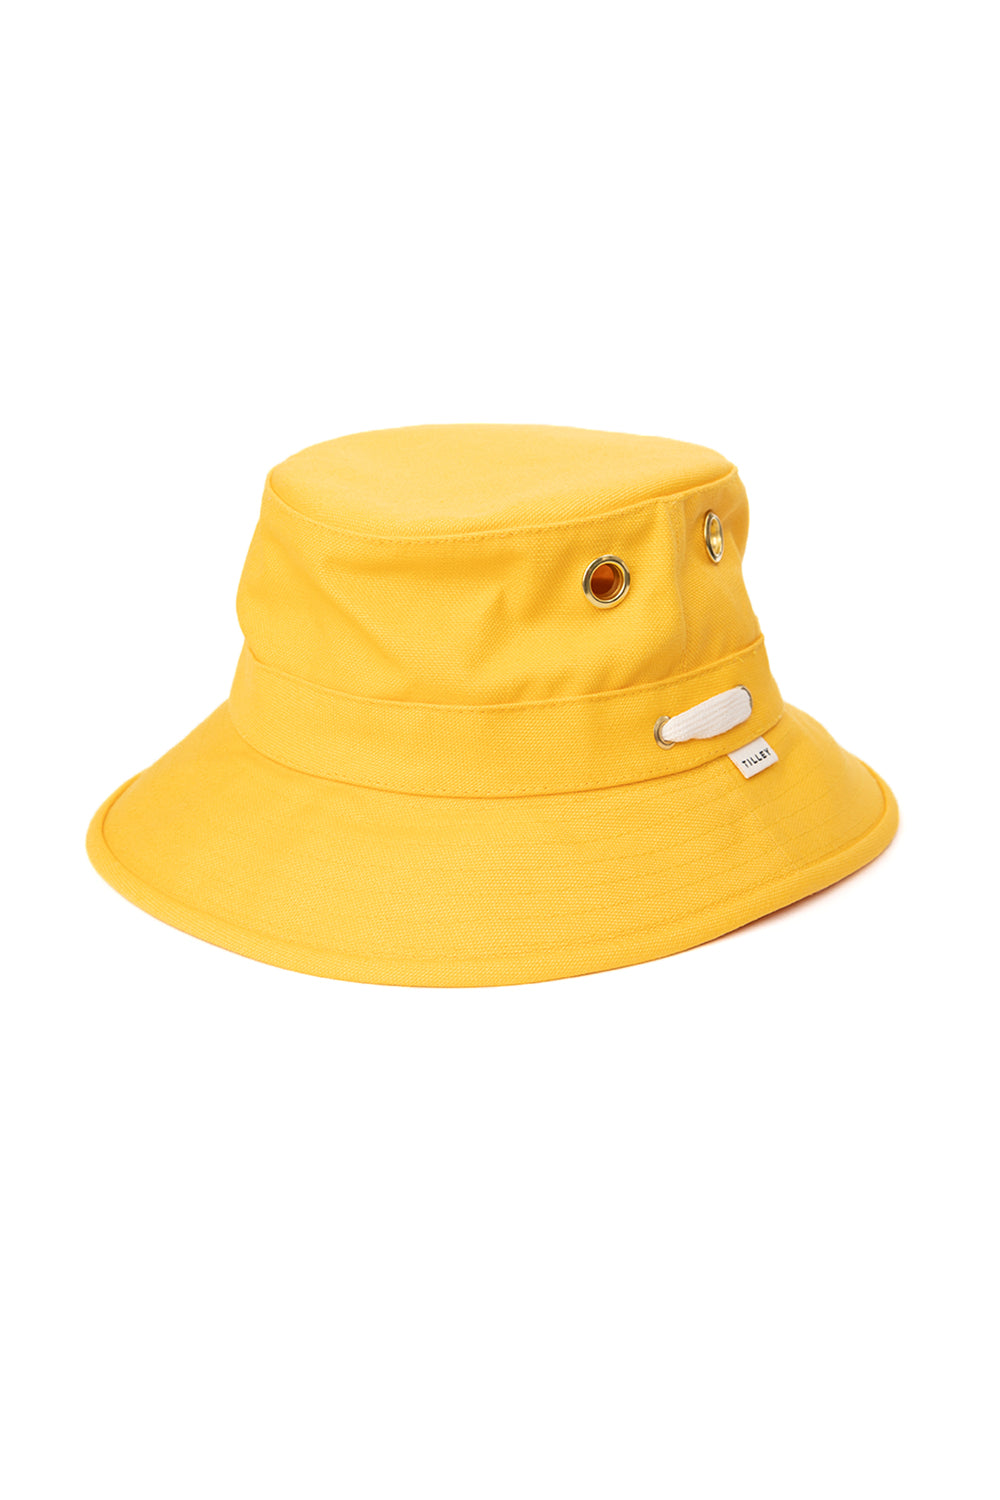 Tilley The Iconic T1 Bucket Hat